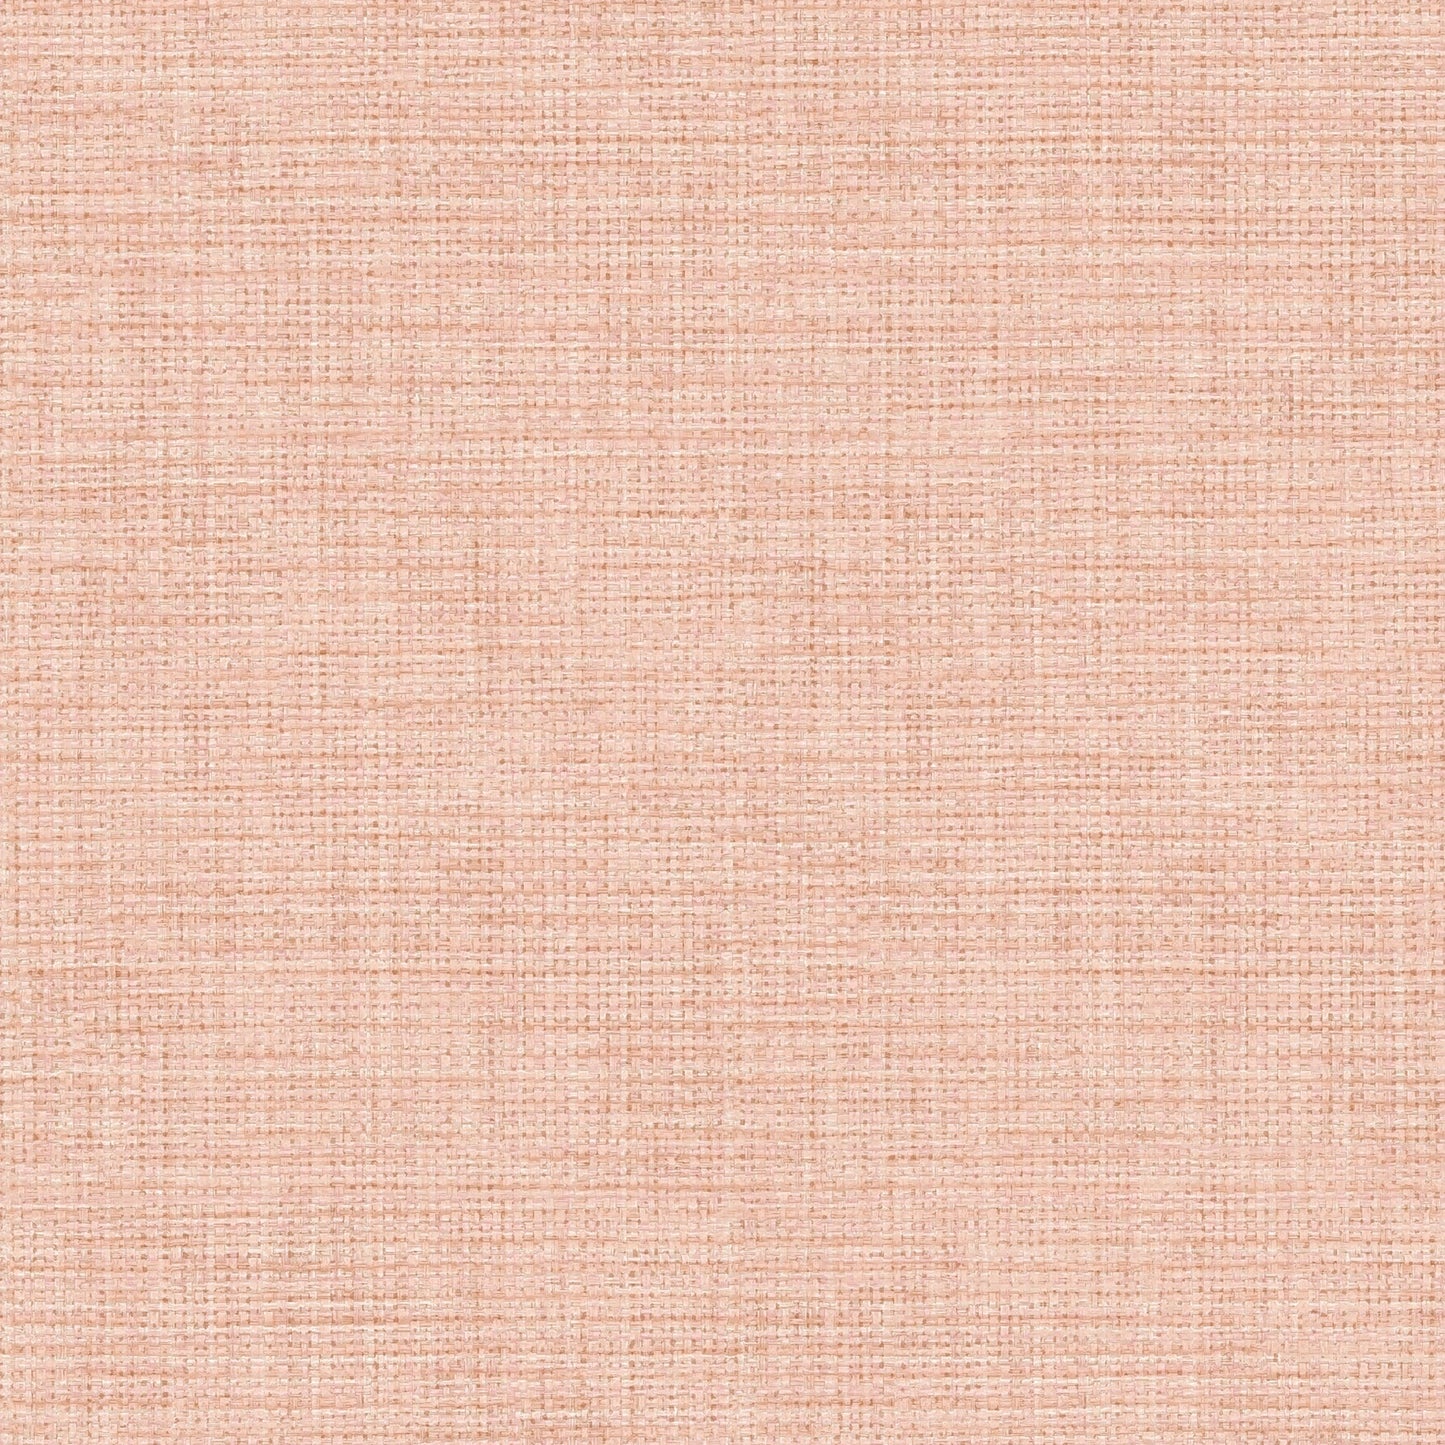 Save 2767-003040 Twine Blush Grass Weave Techniques & Finishes III Brewster